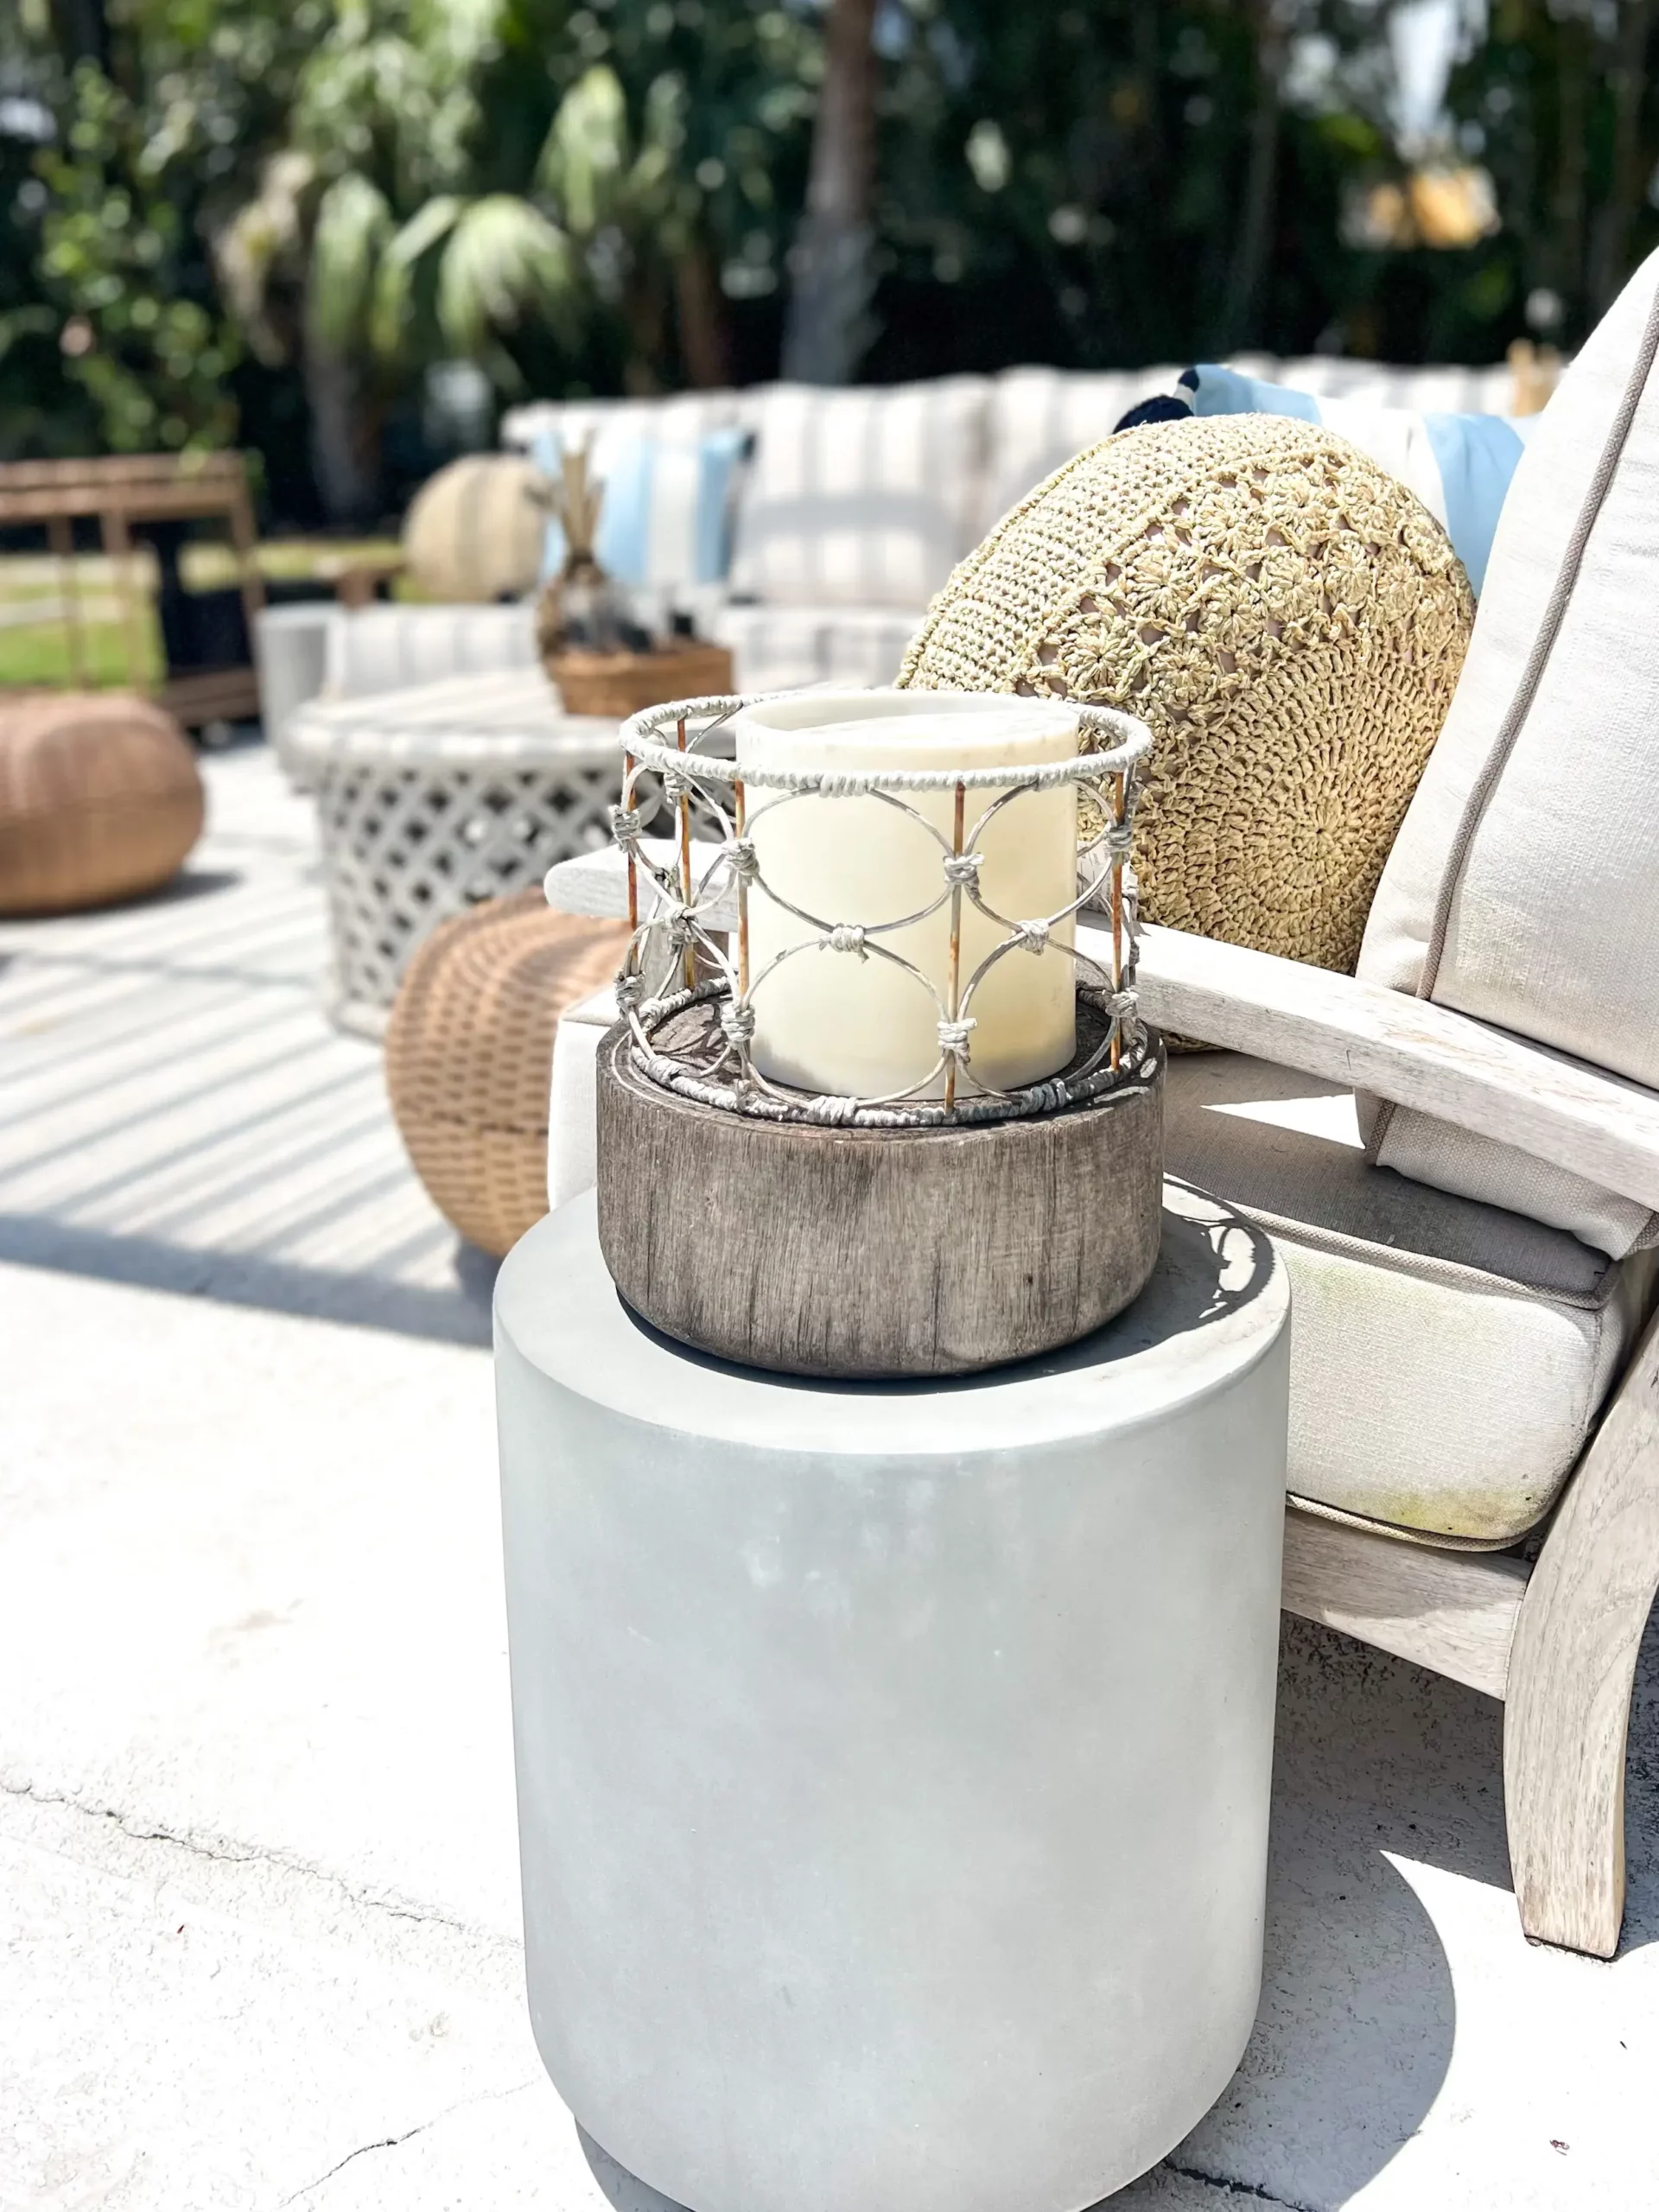 concrete side table with a wooden lantern outside